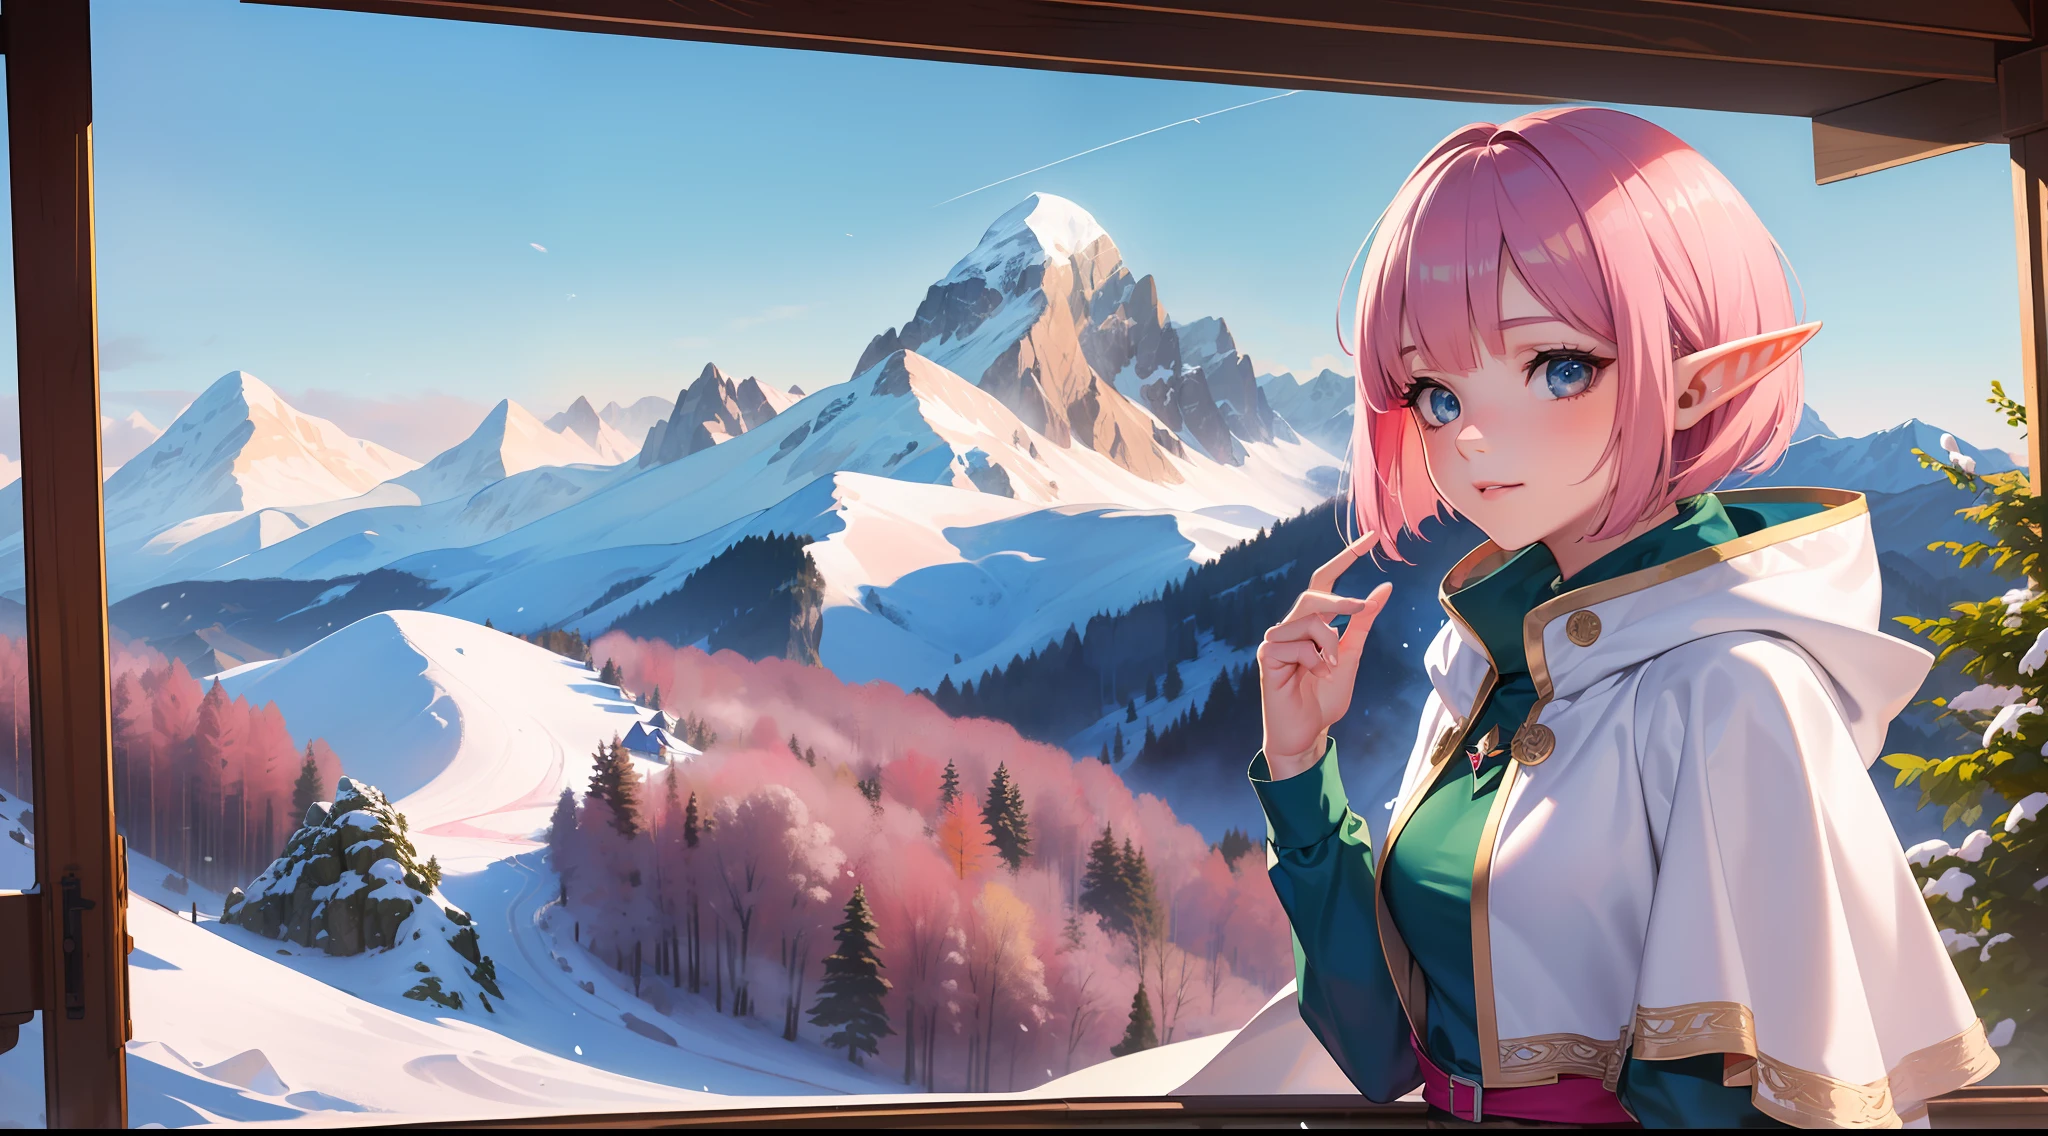 ((A first-class masterpiece)), (top-quality), (hight resolution), (An elf girl:1.3), (Beautiful pink bob cut:1.3),Ski Wear、 (White cloak:1.2), (beautidful eyes:1.3),Bright sunlight、 Snowy mountain peaks in the background, (bustshot:1.2)